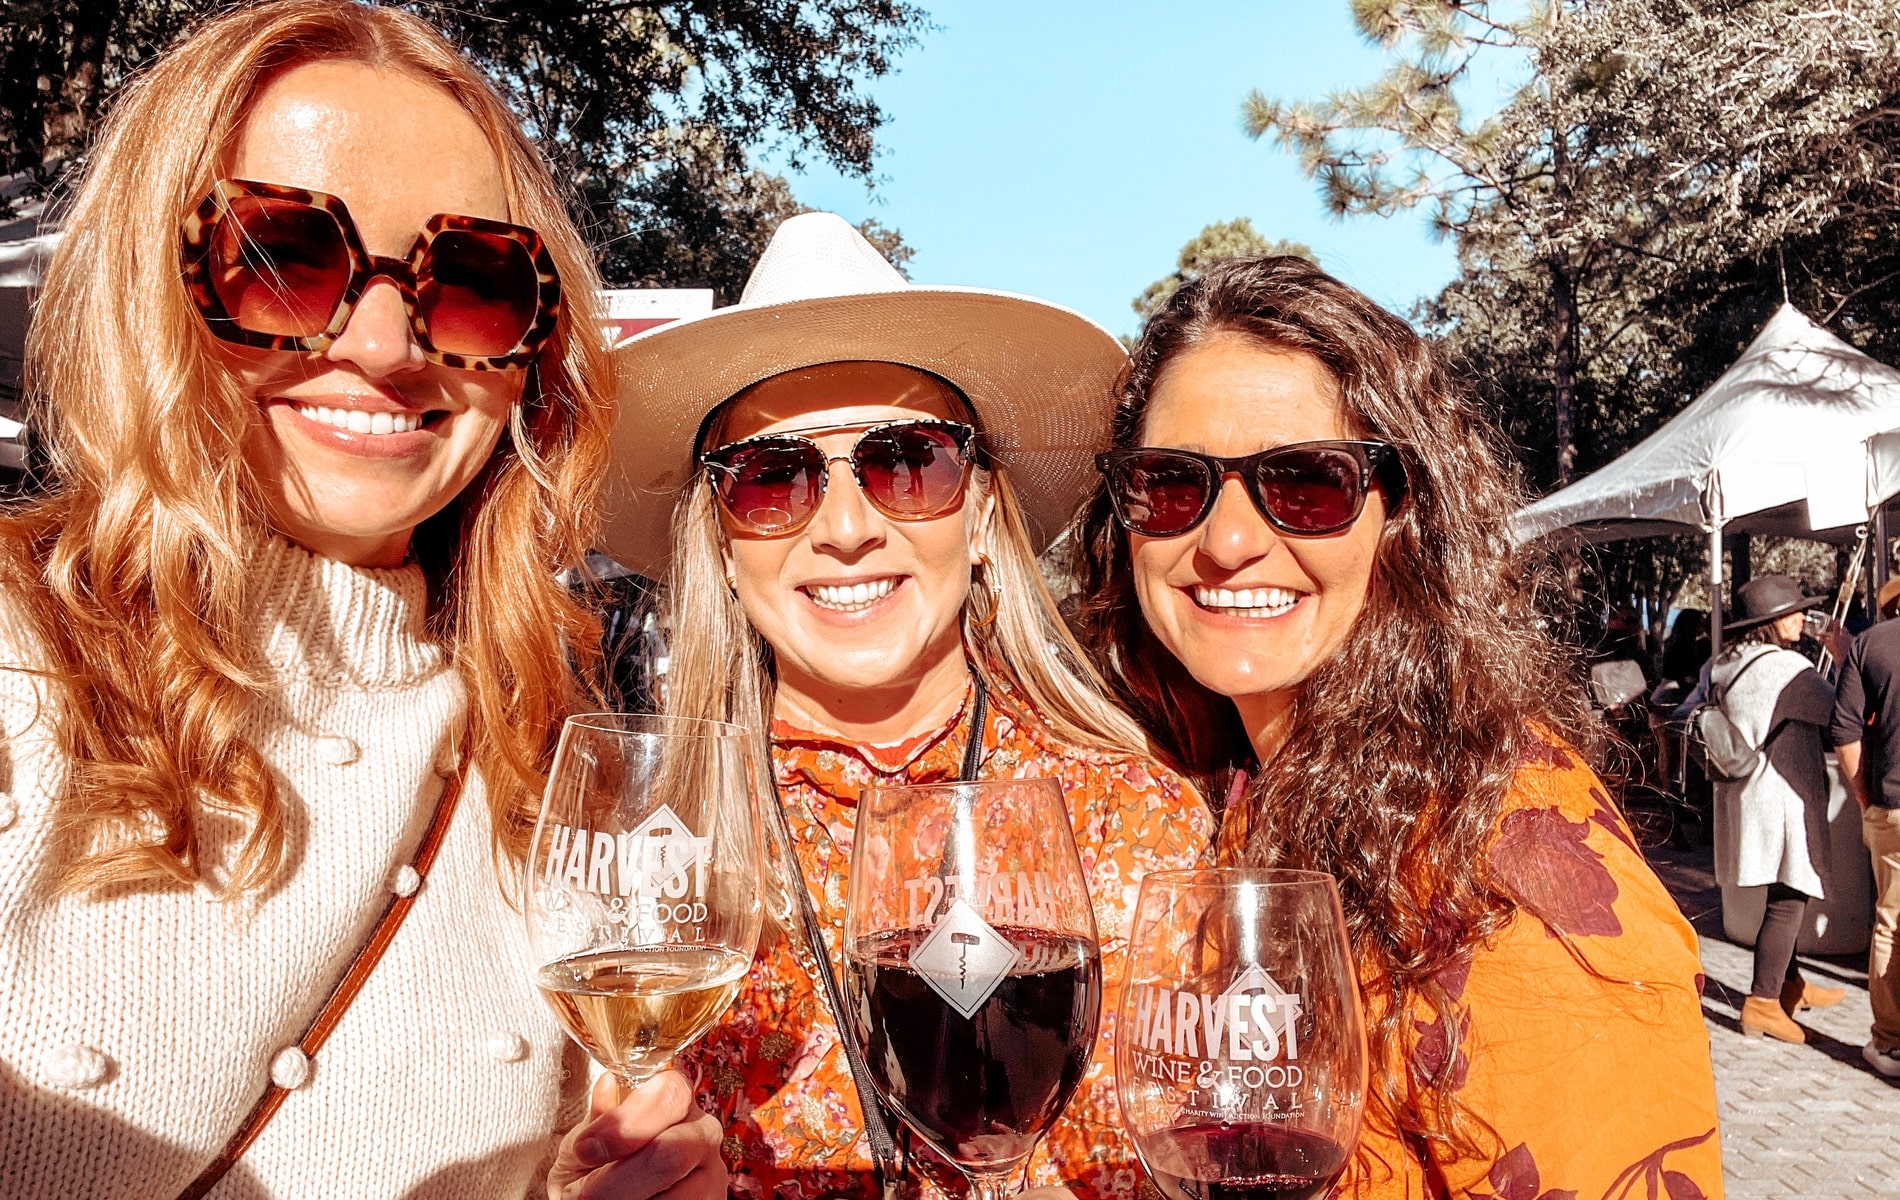 Harvest Wine and Food Festival Returns to WaterColor, Florida